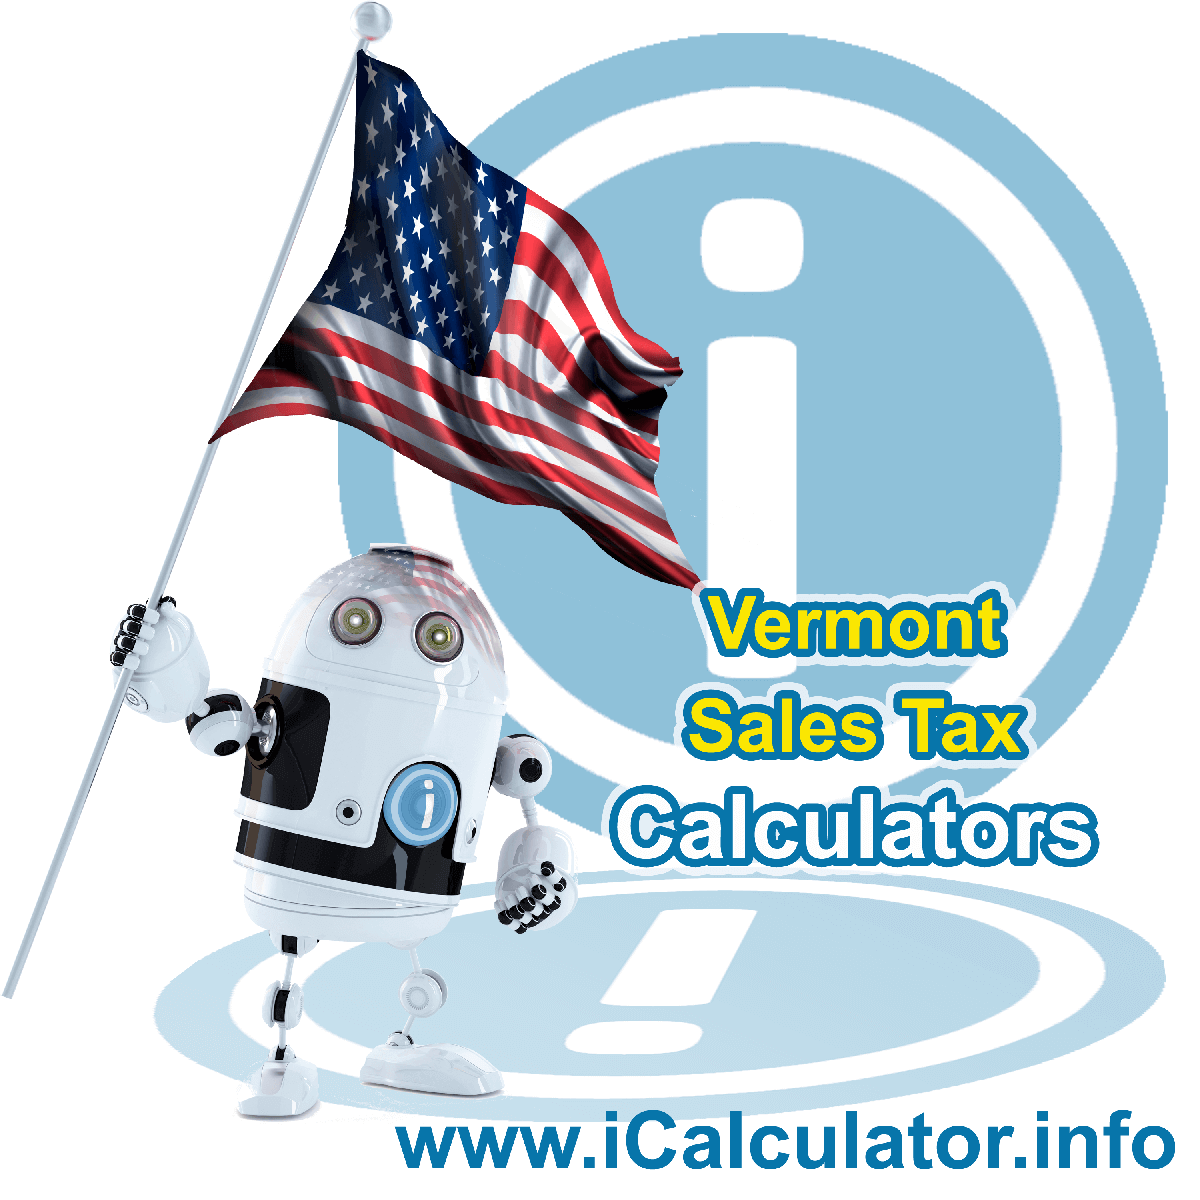 Burlington Sales Rates: This image illustrates a calculator robot calculating Burlington sales tax manually using the Burlington Sales Tax Formula. You can use this information to calculate Burlington Sales Tax manually or use the Burlington Sales Tax Calculator to calculate sales tax online.